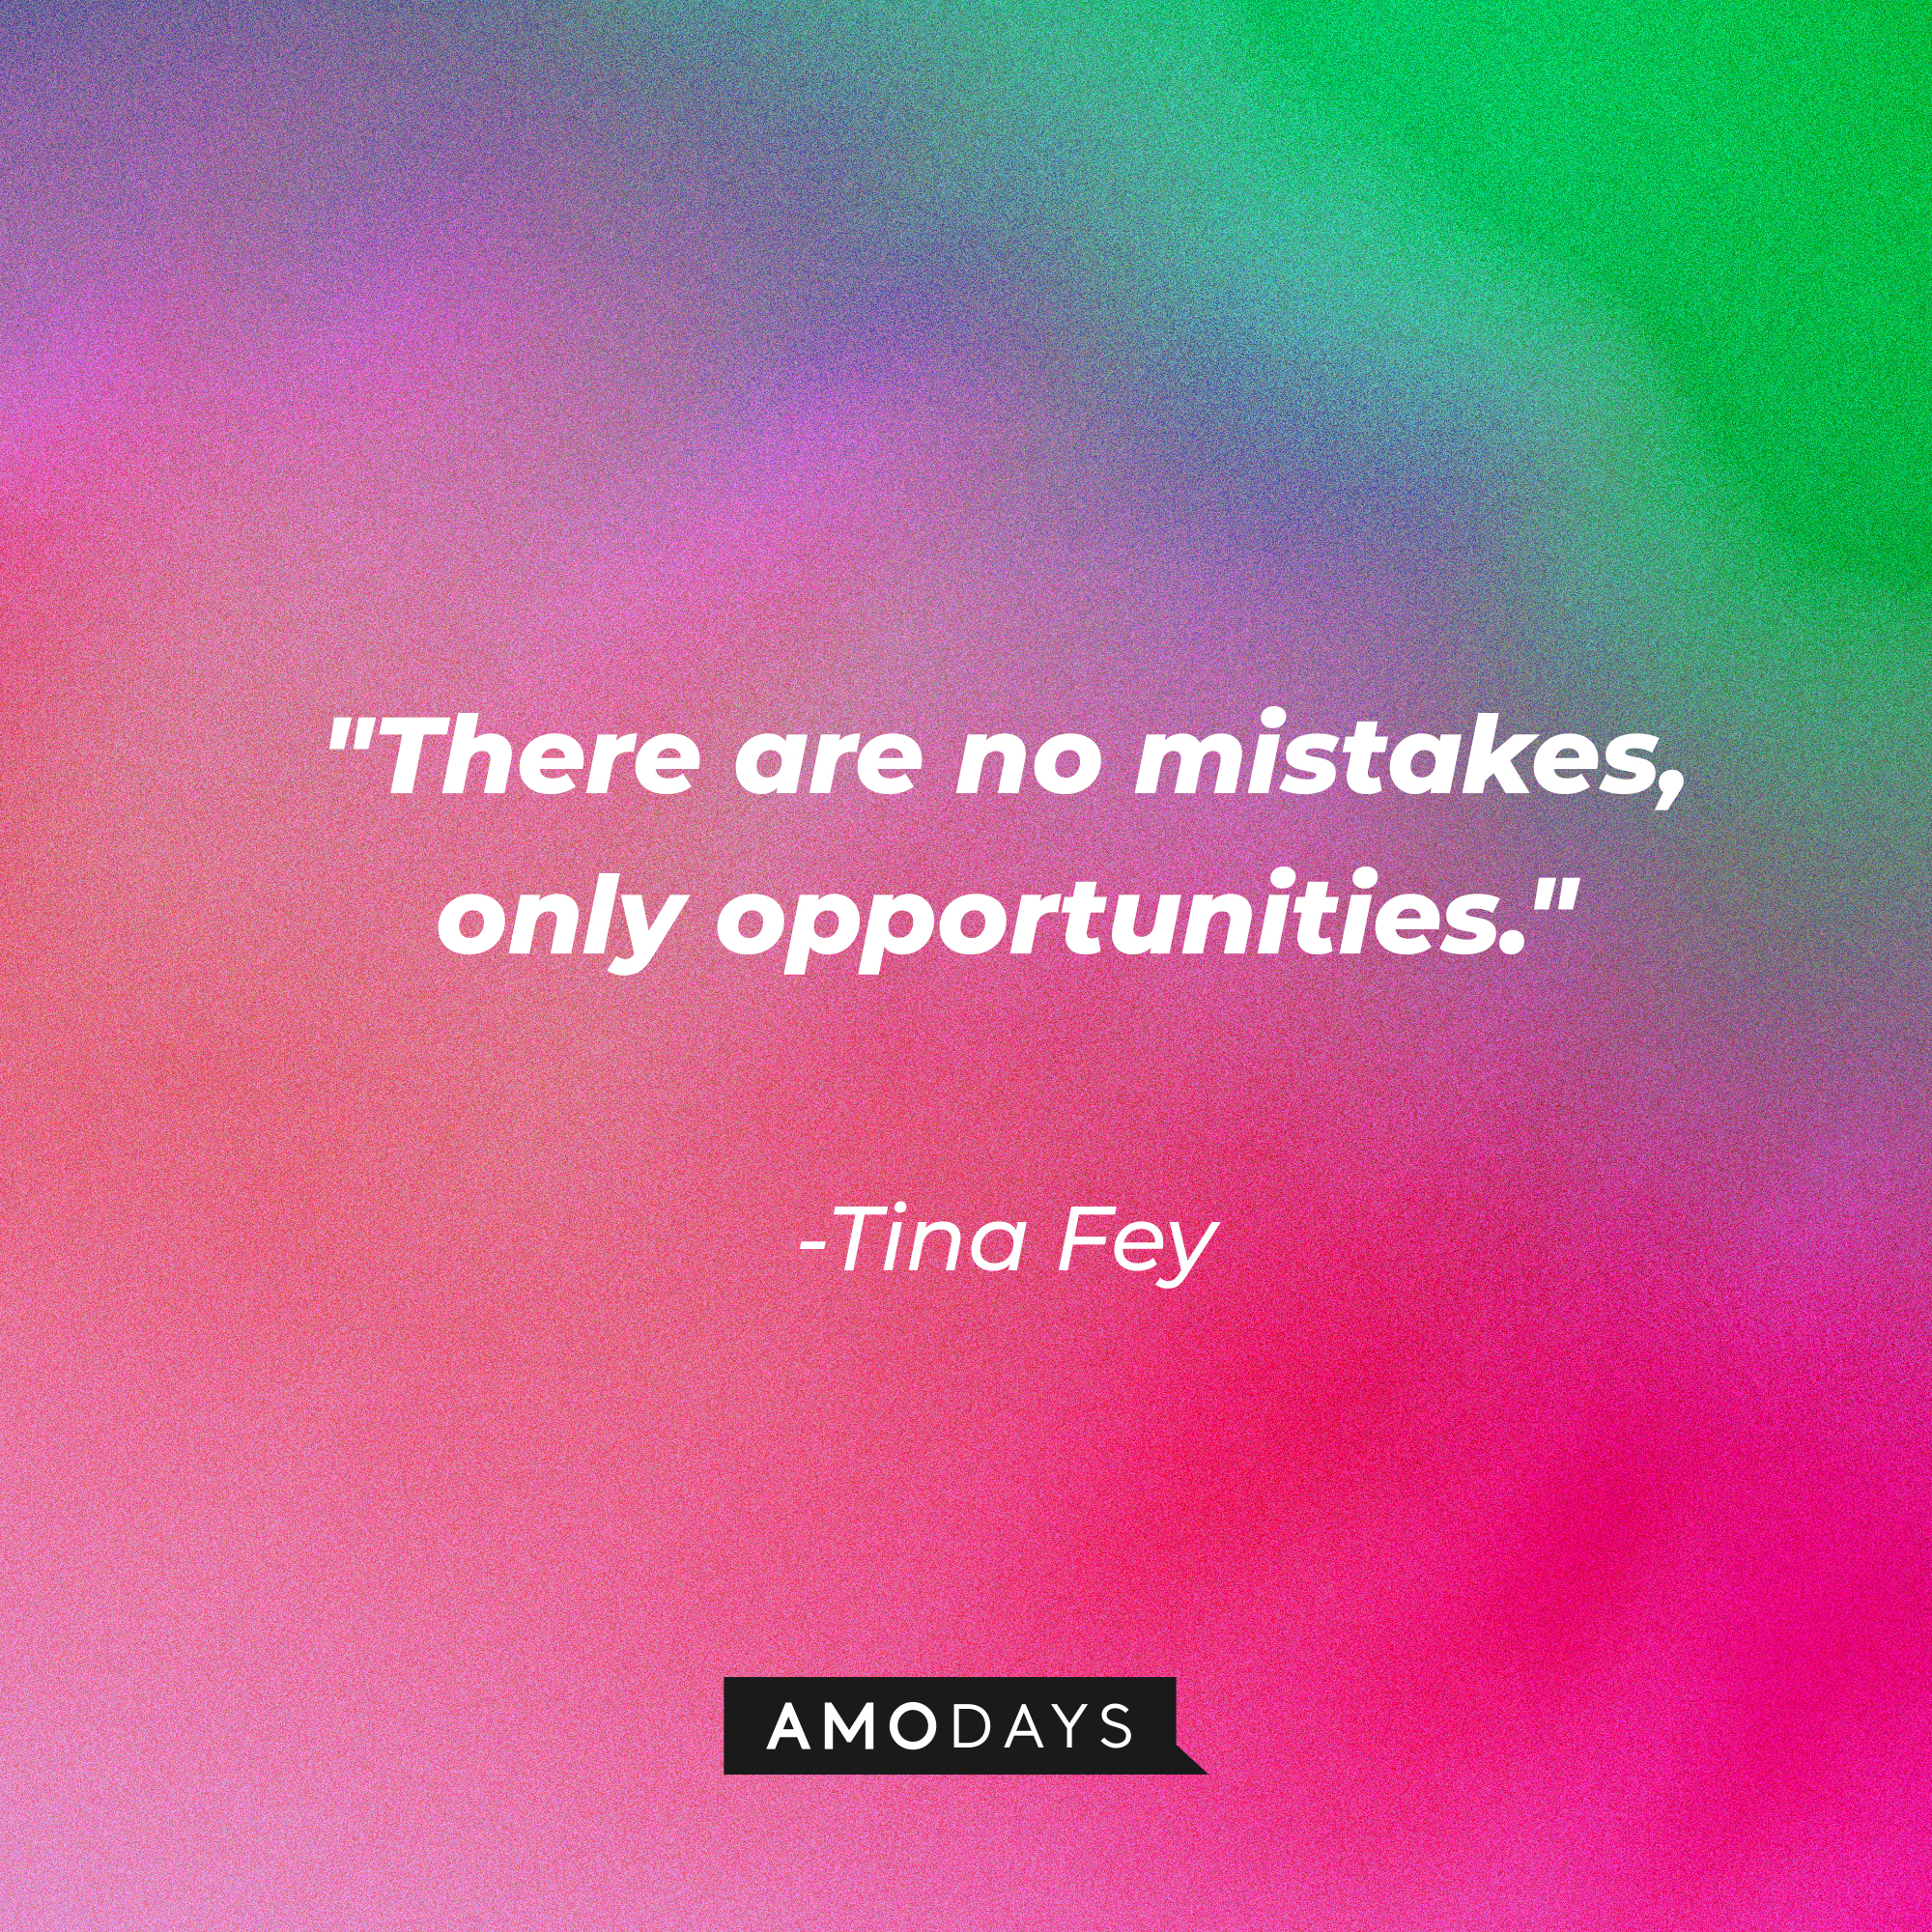 Tina Fey's quote: "There are no mistakes, only opportunities."  | Source: AmoDays